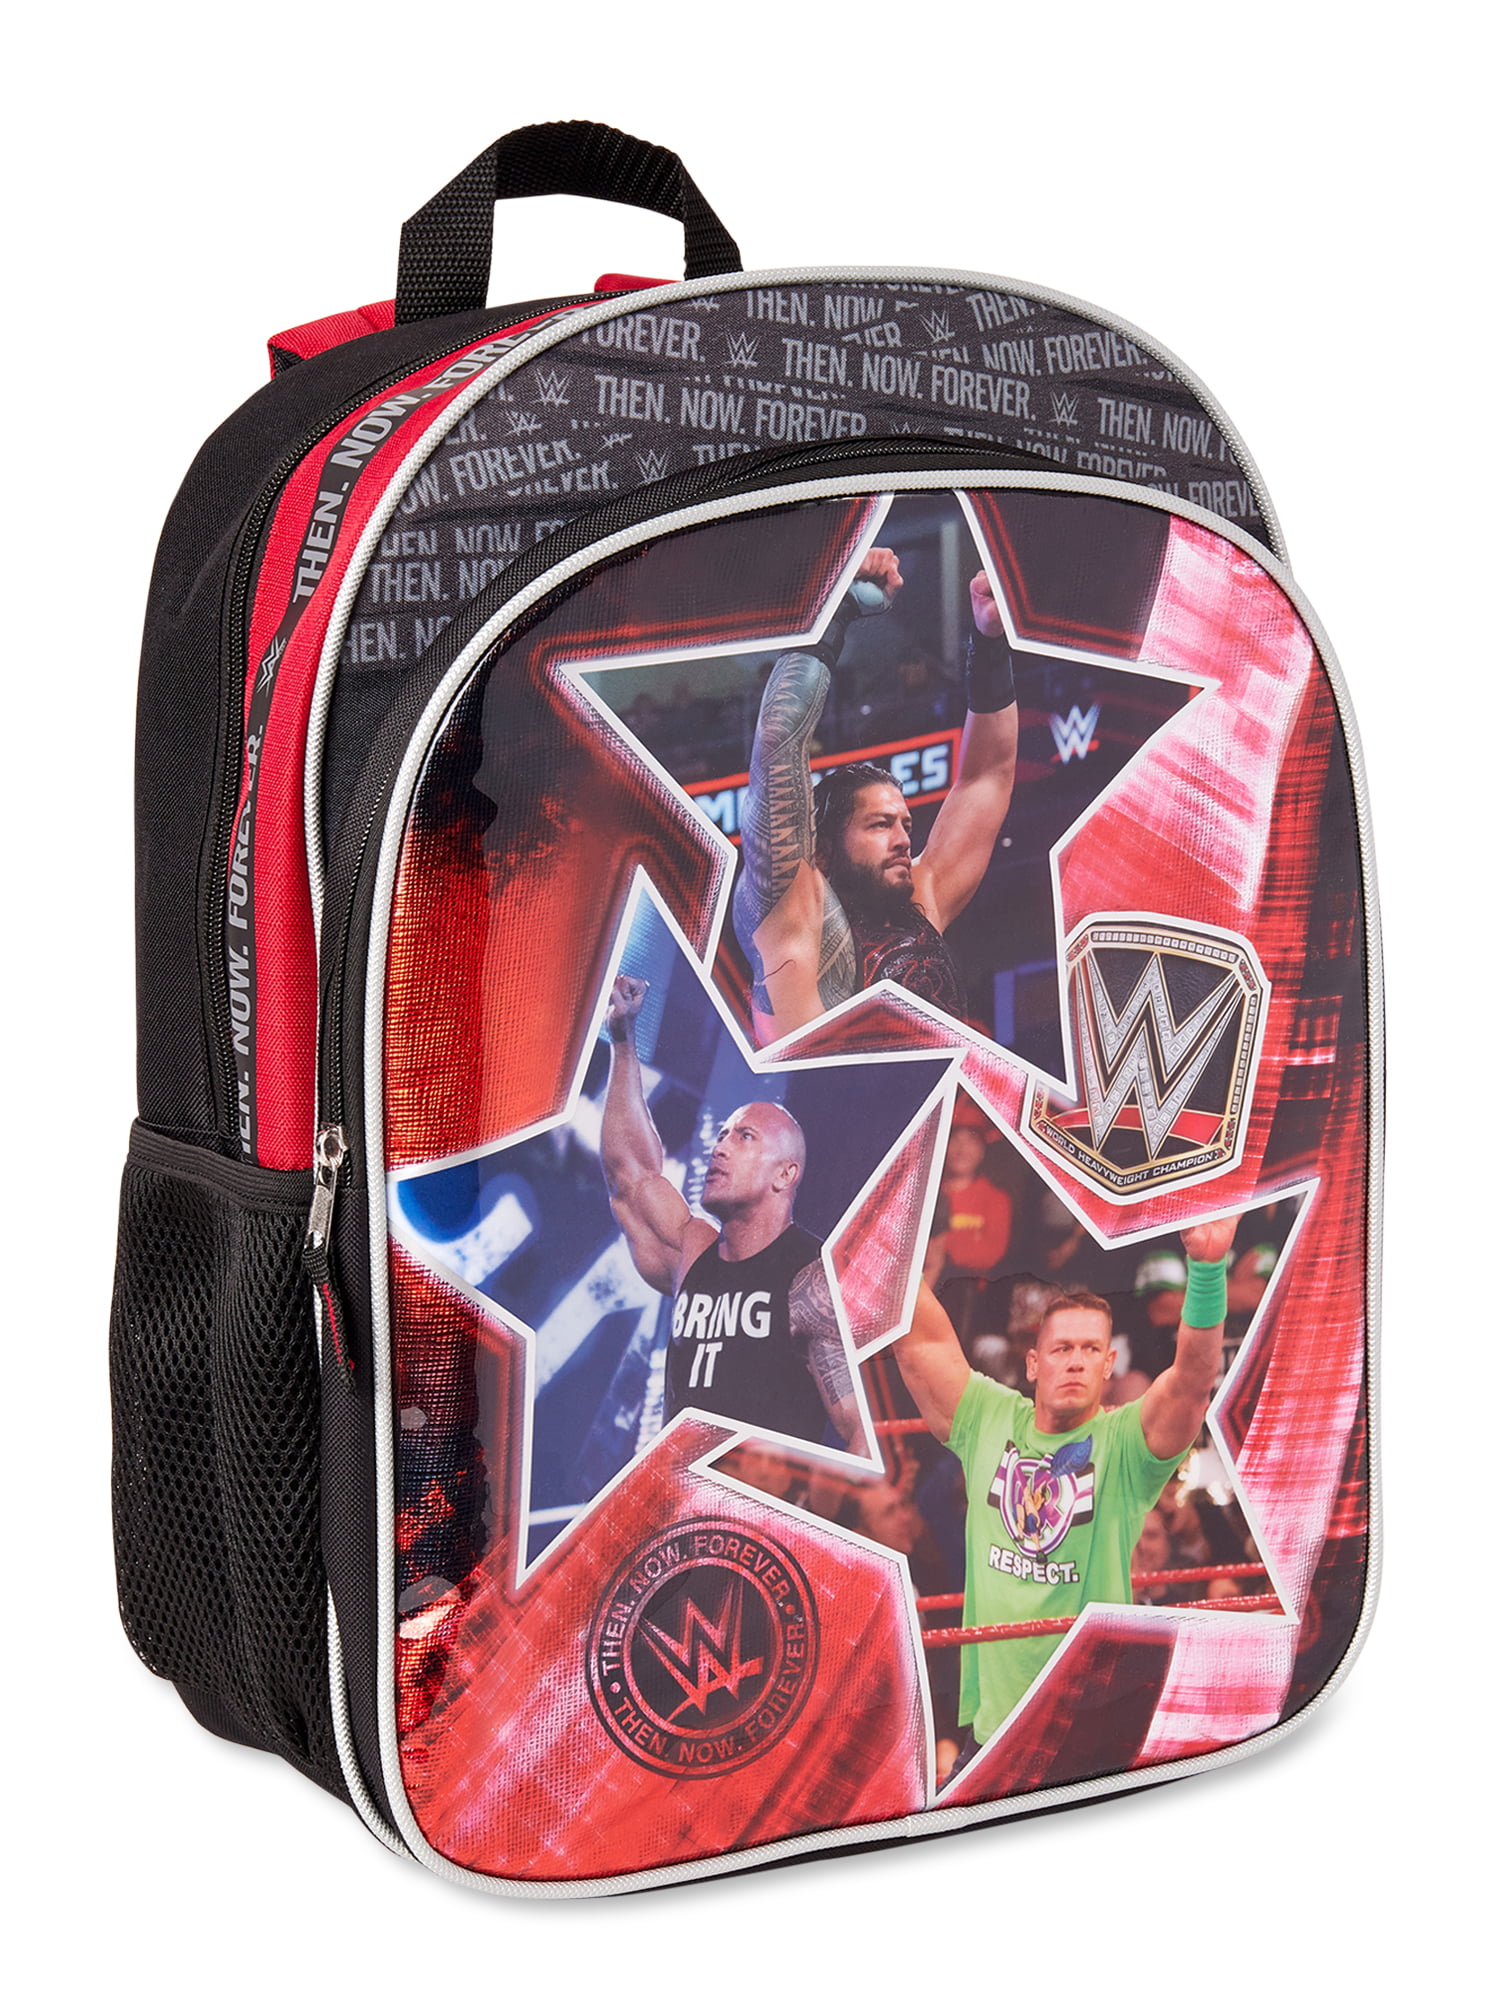 WWEShop.com on X: It's that time again: time to start planning for  #BackToSchool. #WWEShop has you covered, with tons of exclusive #WWE  essentials from backpacks to lunch bags, lanyards & more!